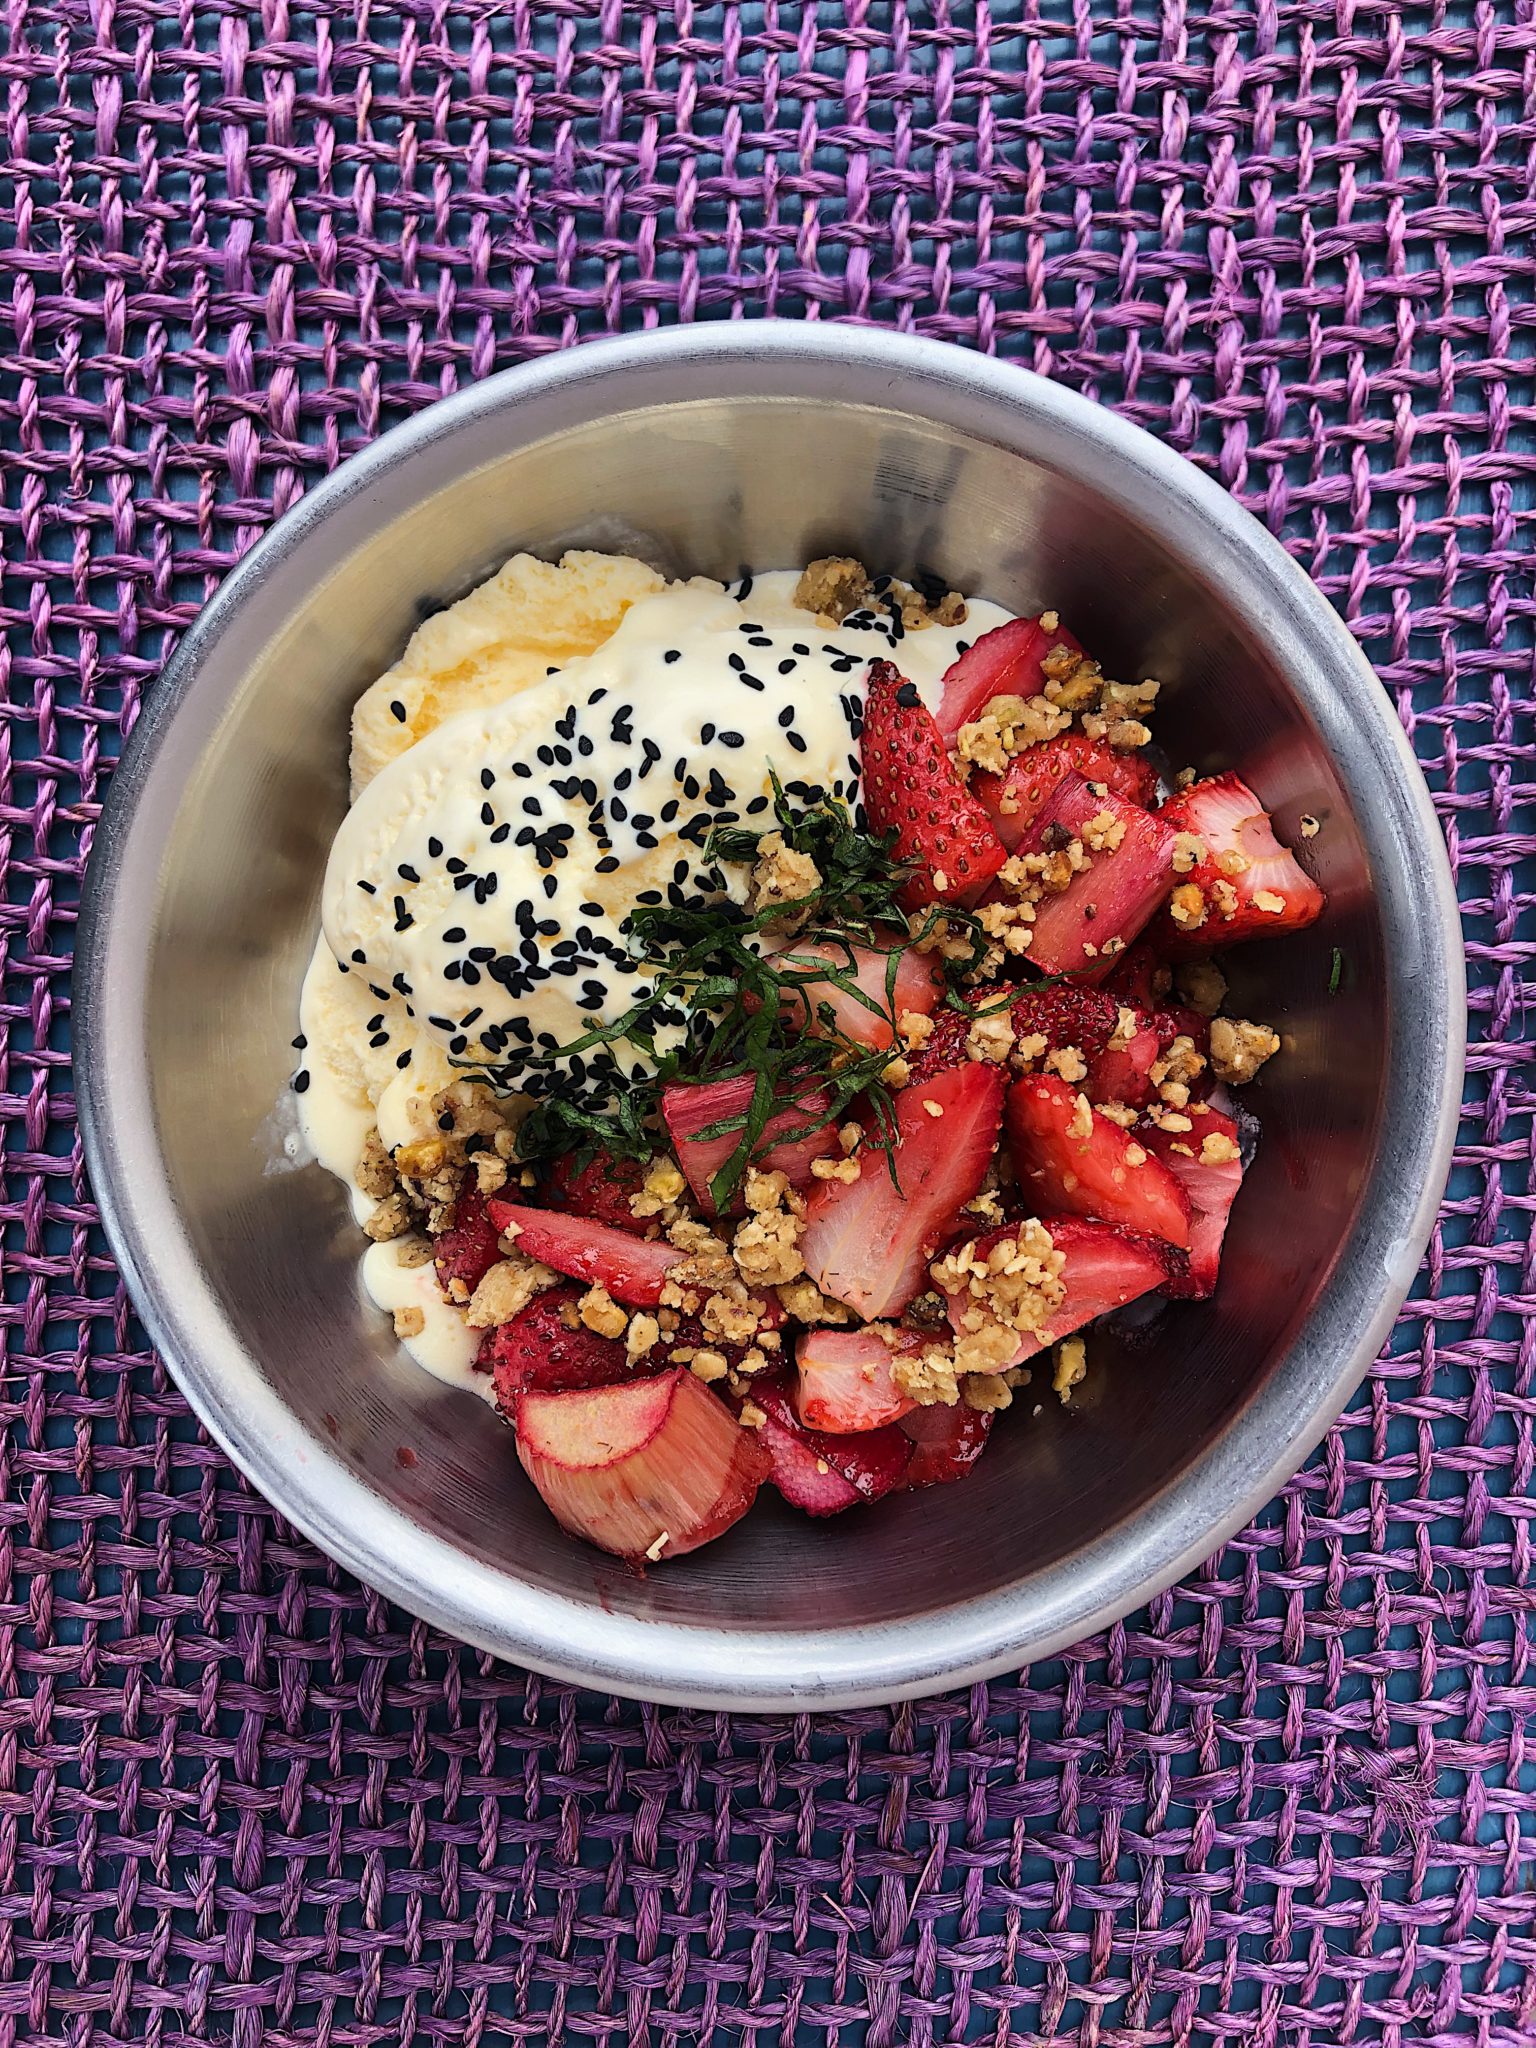 Summer Recipes - Roasted Strawberries and Rhubarb, Pistachio Crumble and Vanilla Ice Cream